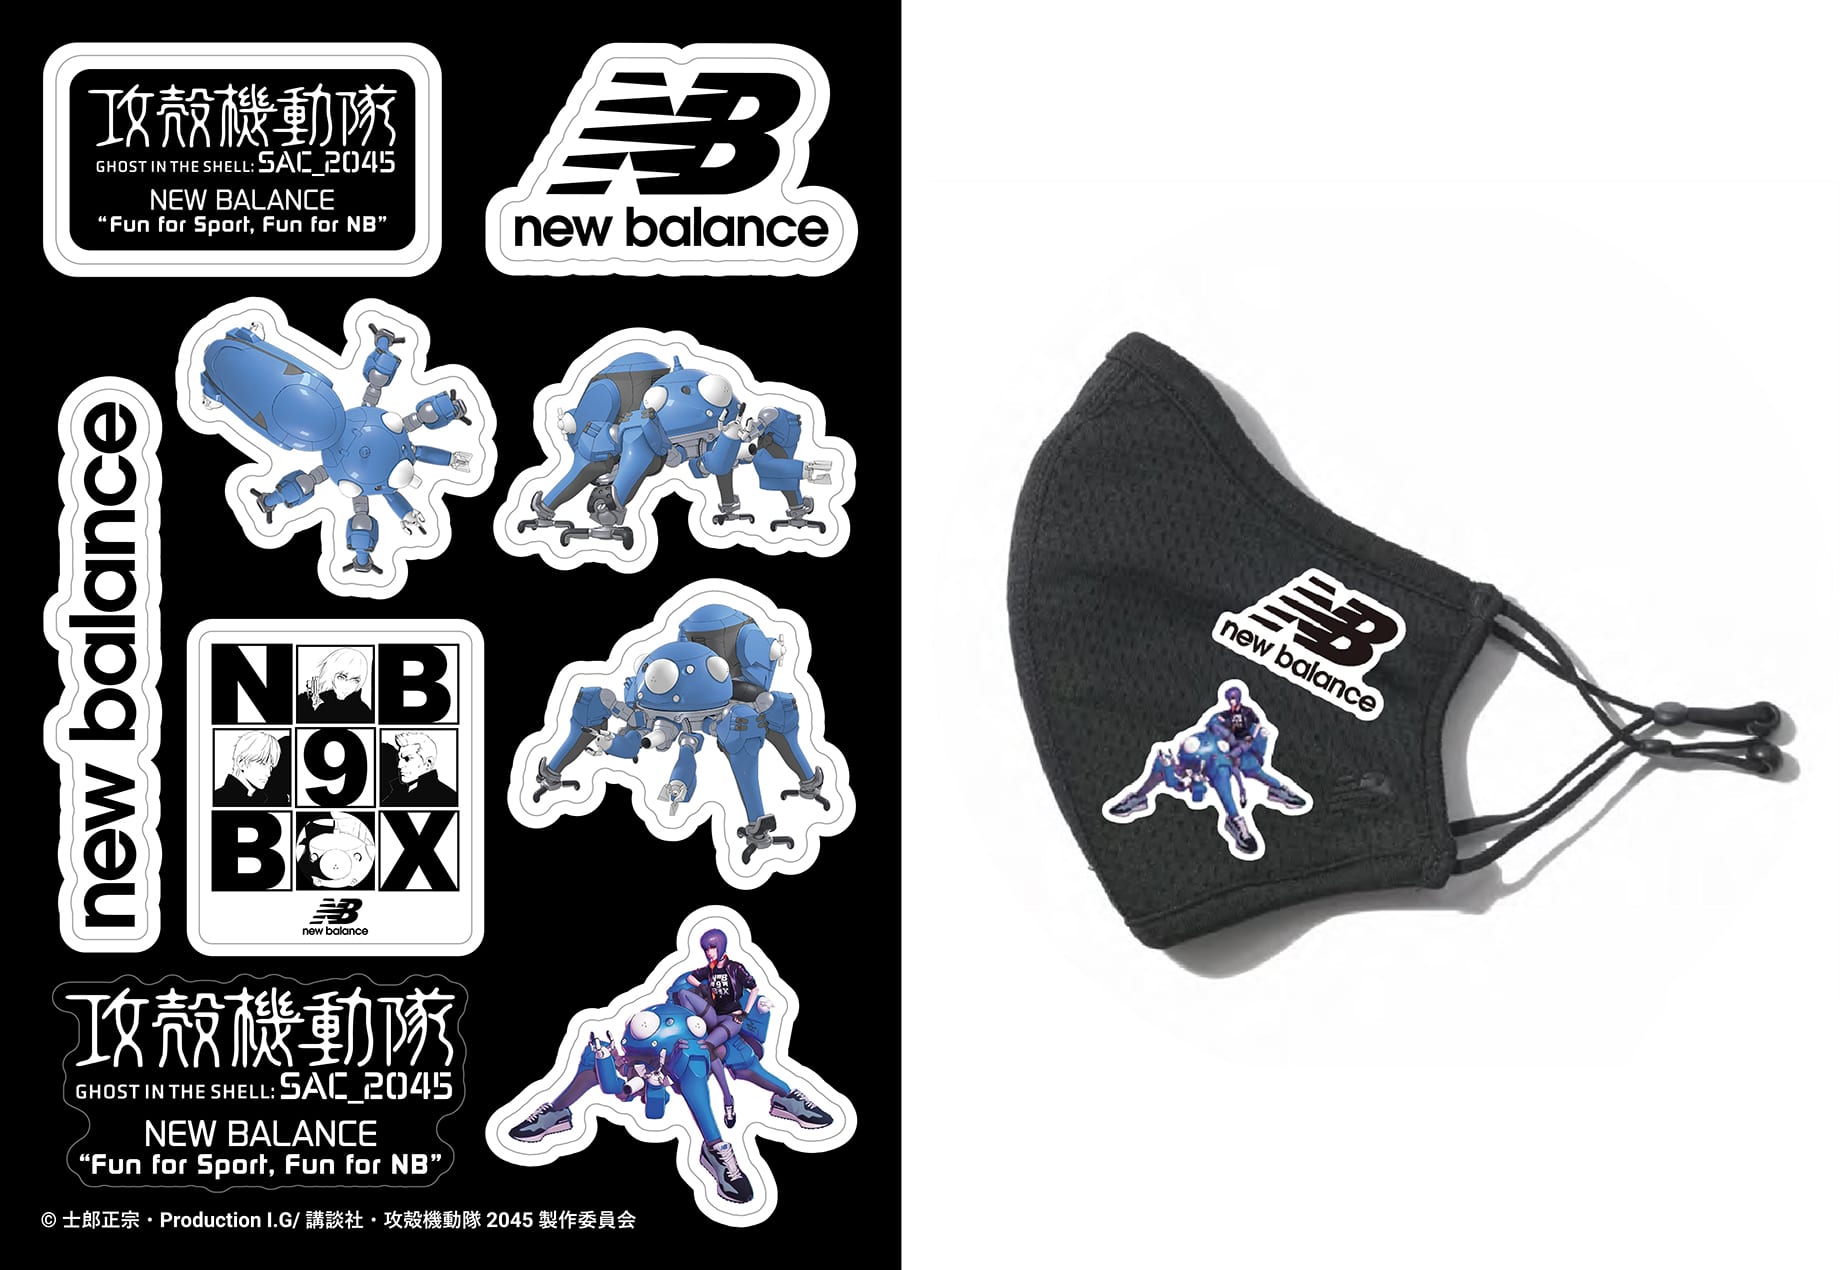 NEW BALANCE 9 BOX × Ghost in the shell SAC_2045